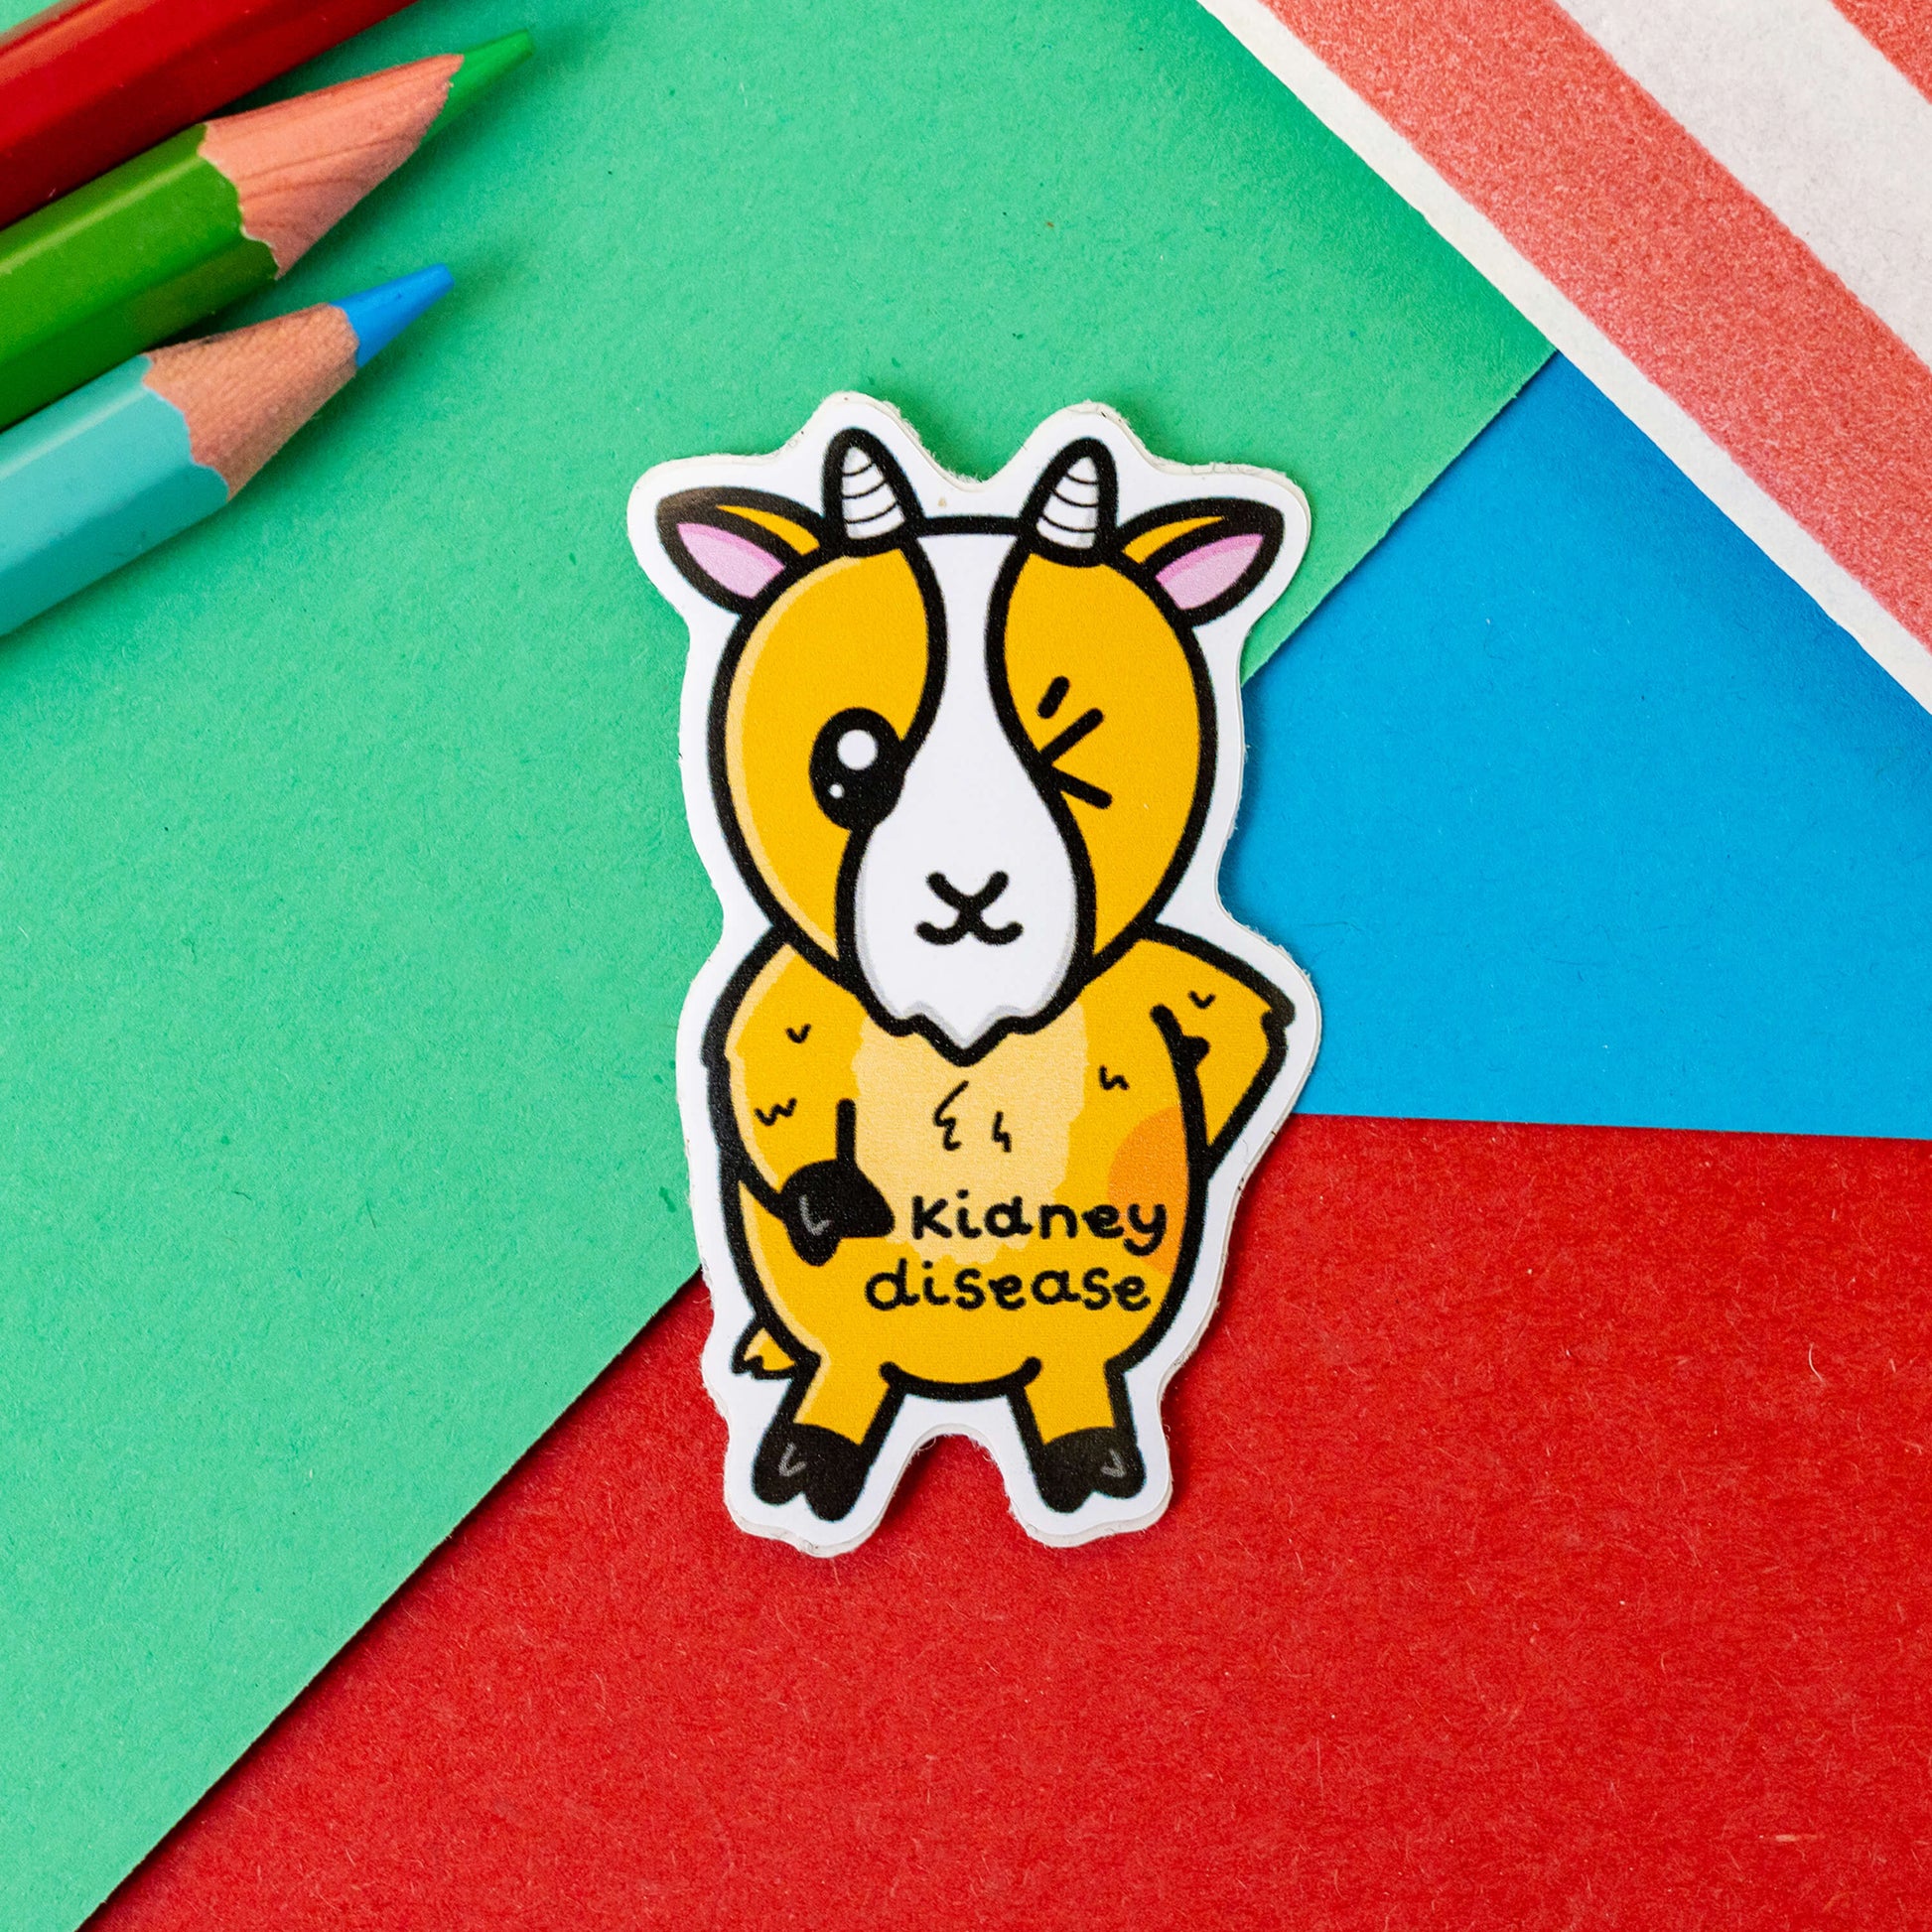 The Kidney Disease Goat Sticker on a red, blue and green background with colouring pencils and red stripe candy bag. The goat shape sticker is orange with little horns winking with a red right hand side, across its middle is black text that reads 'Kidney disease'. The hand drawn design is raising awareness for kidney diseases.